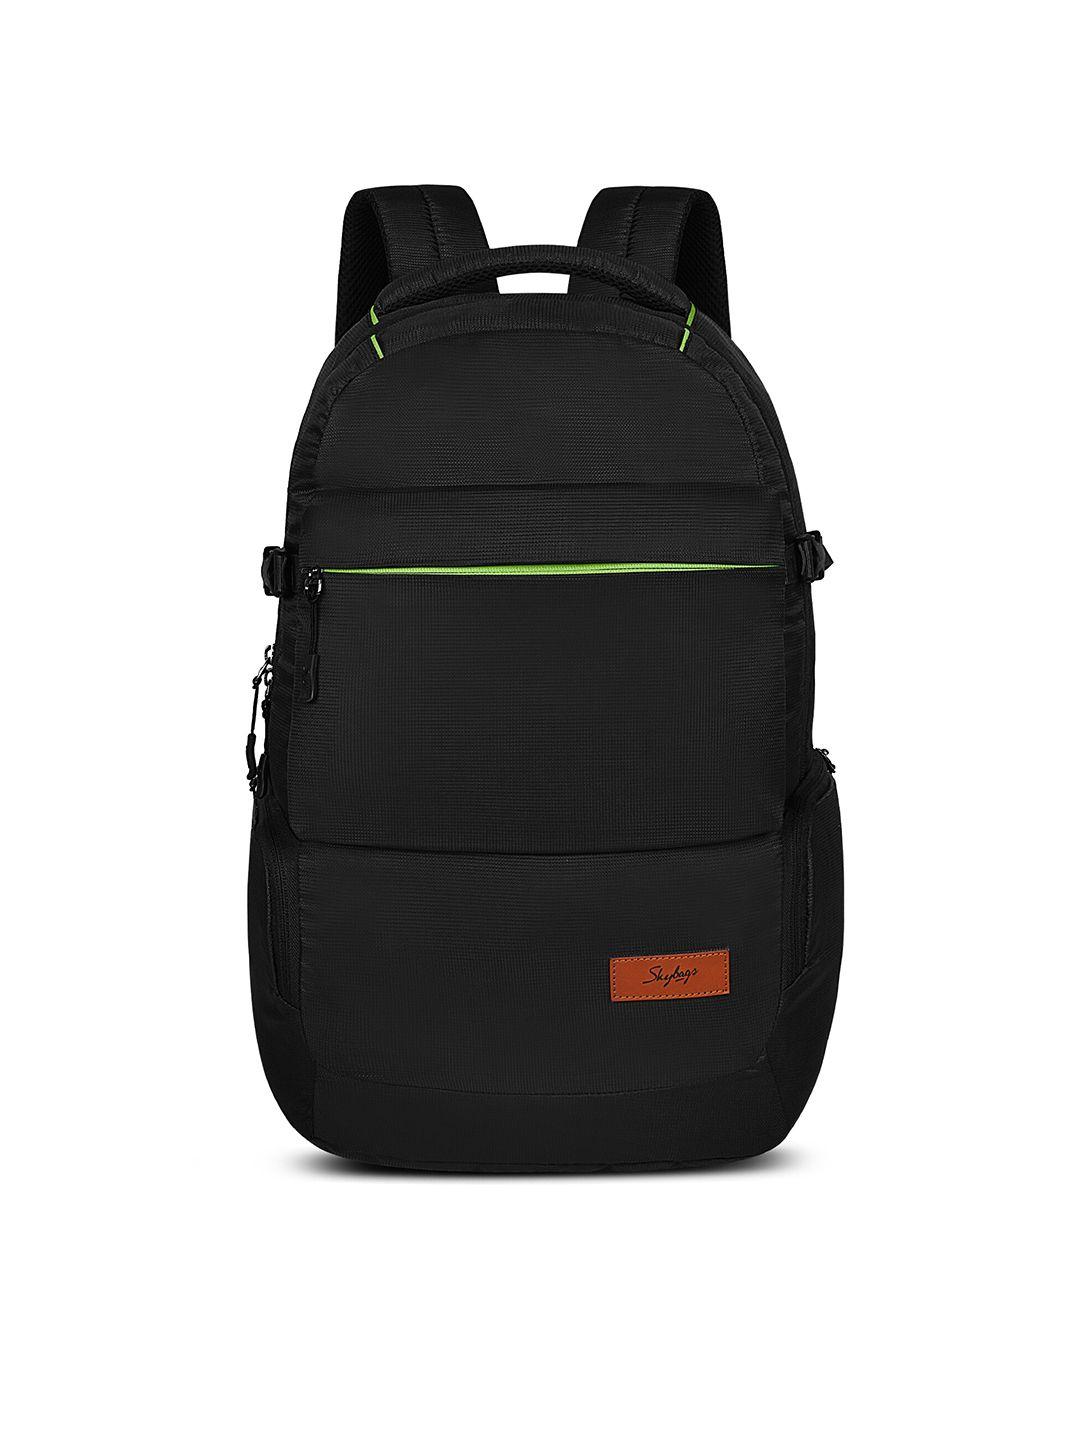 skybags unisex black & fluorescent green solid backpack